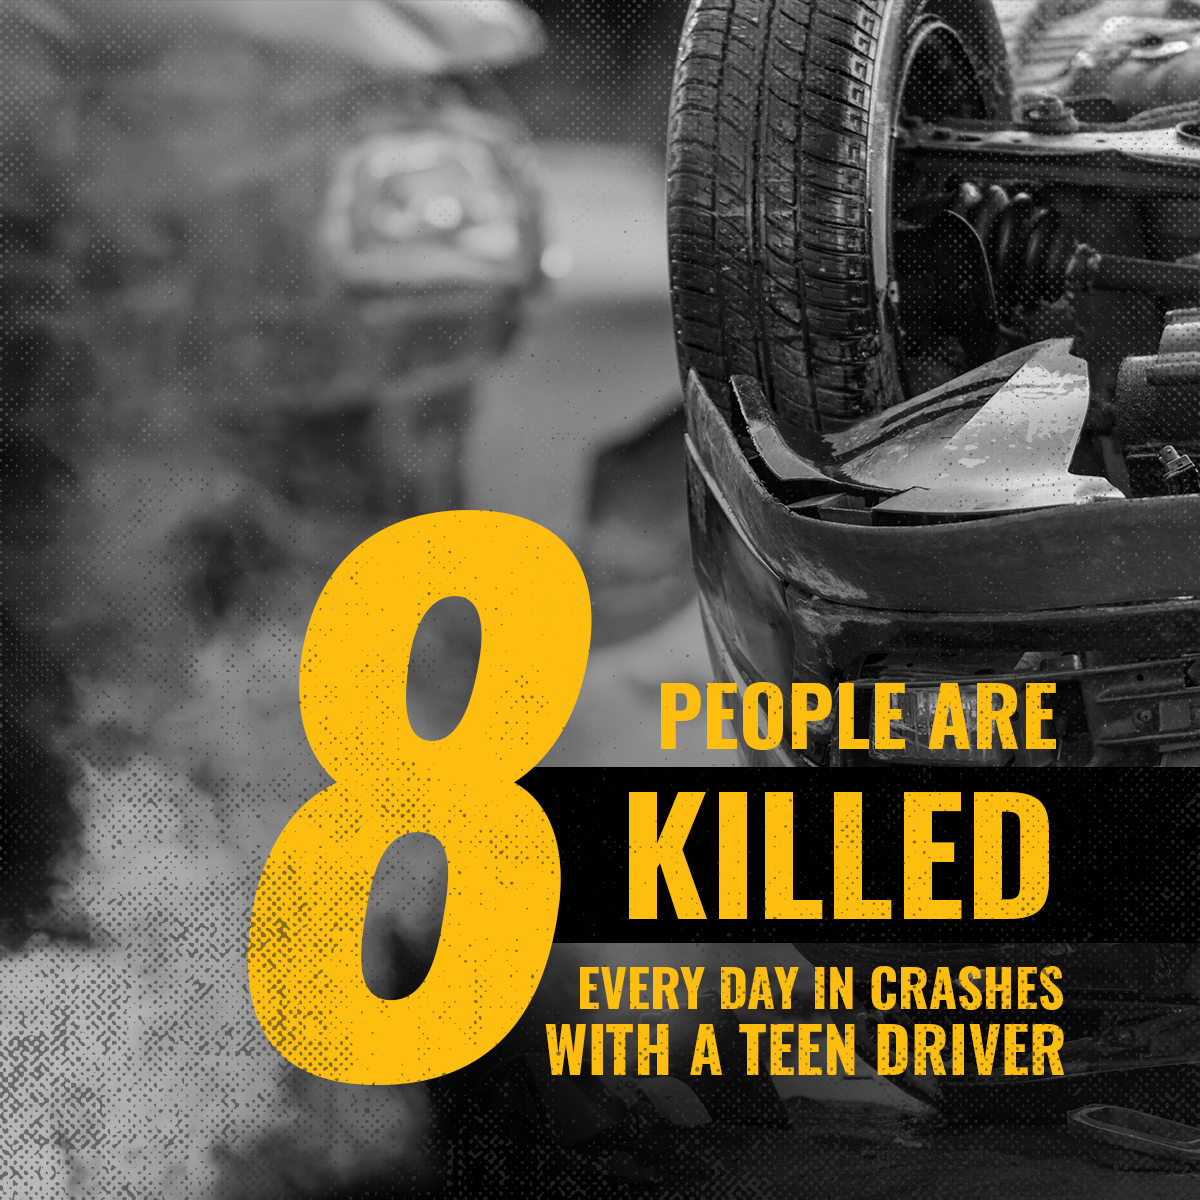 8 People are Killed Every Day in Crashes Involving a Teen Driver